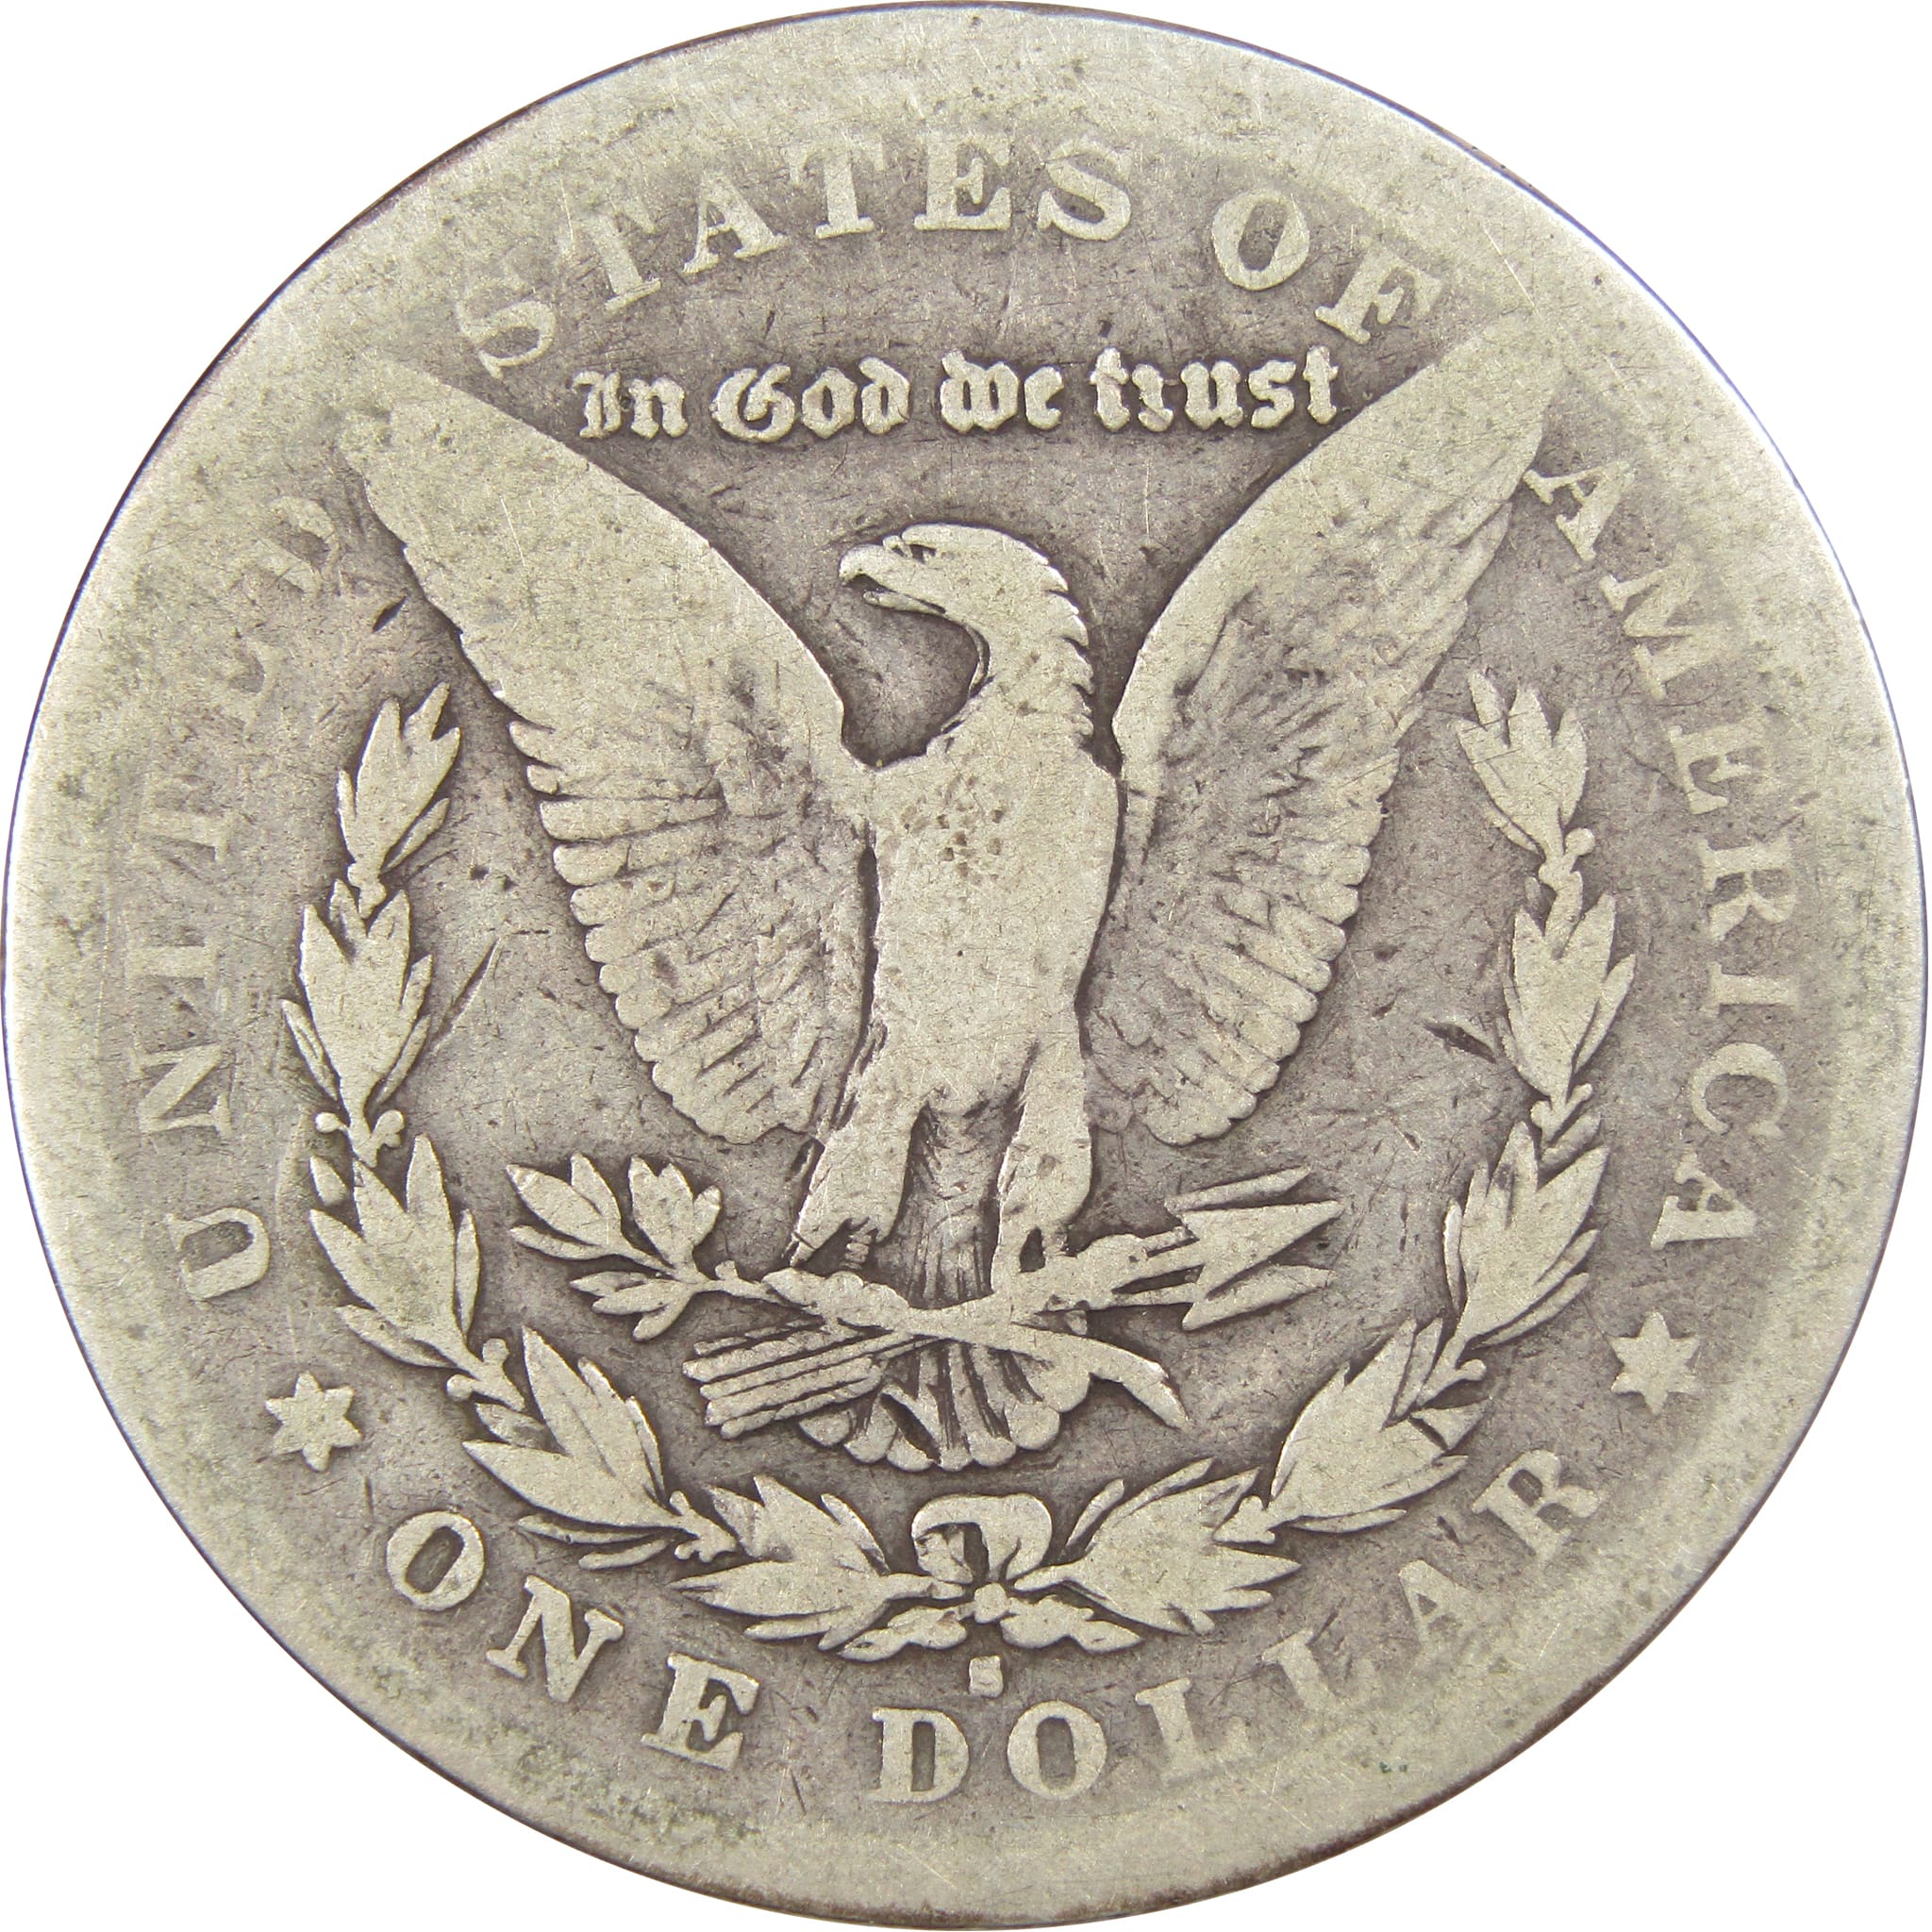 1879 S Rev 78 Morgan Dollar AG About Good 90% Silver SKU:IPC7448 - Morgan coin - Morgan silver dollar - Morgan silver dollar for sale - Profile Coins &amp; Collectibles